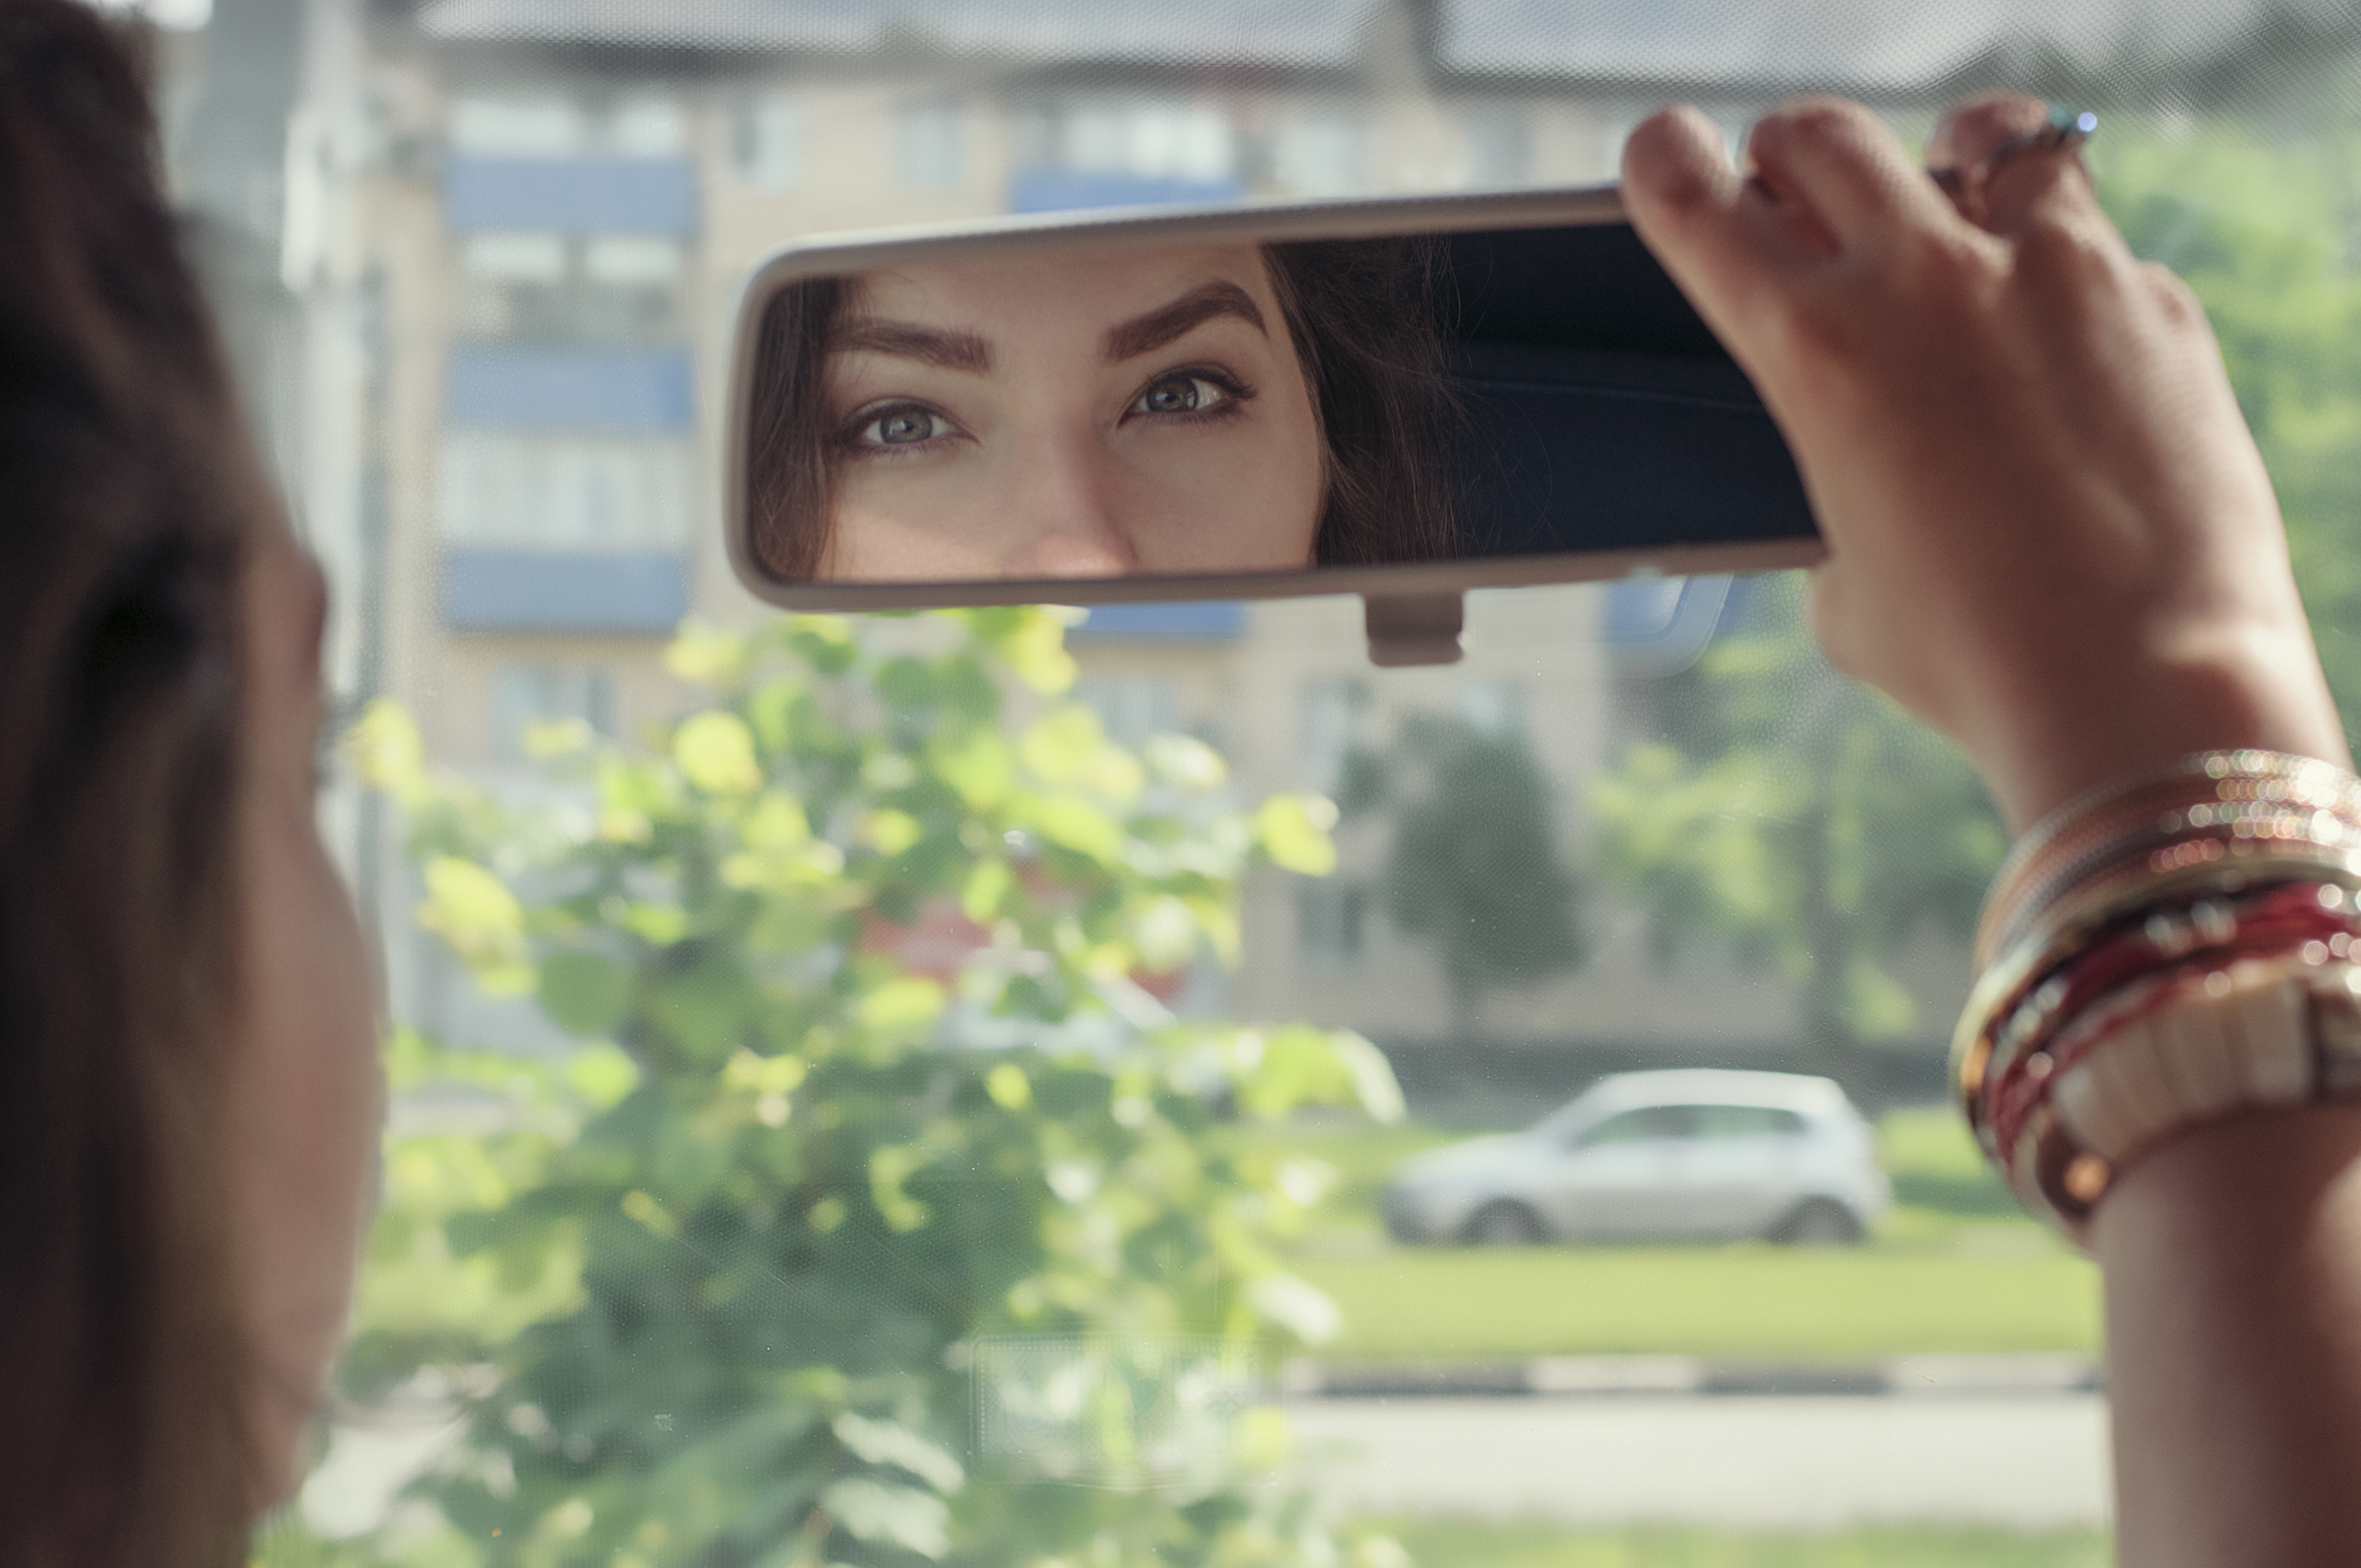 Woman looking at her reflection in the rearview mirror of car | Source: Shutterstock.com